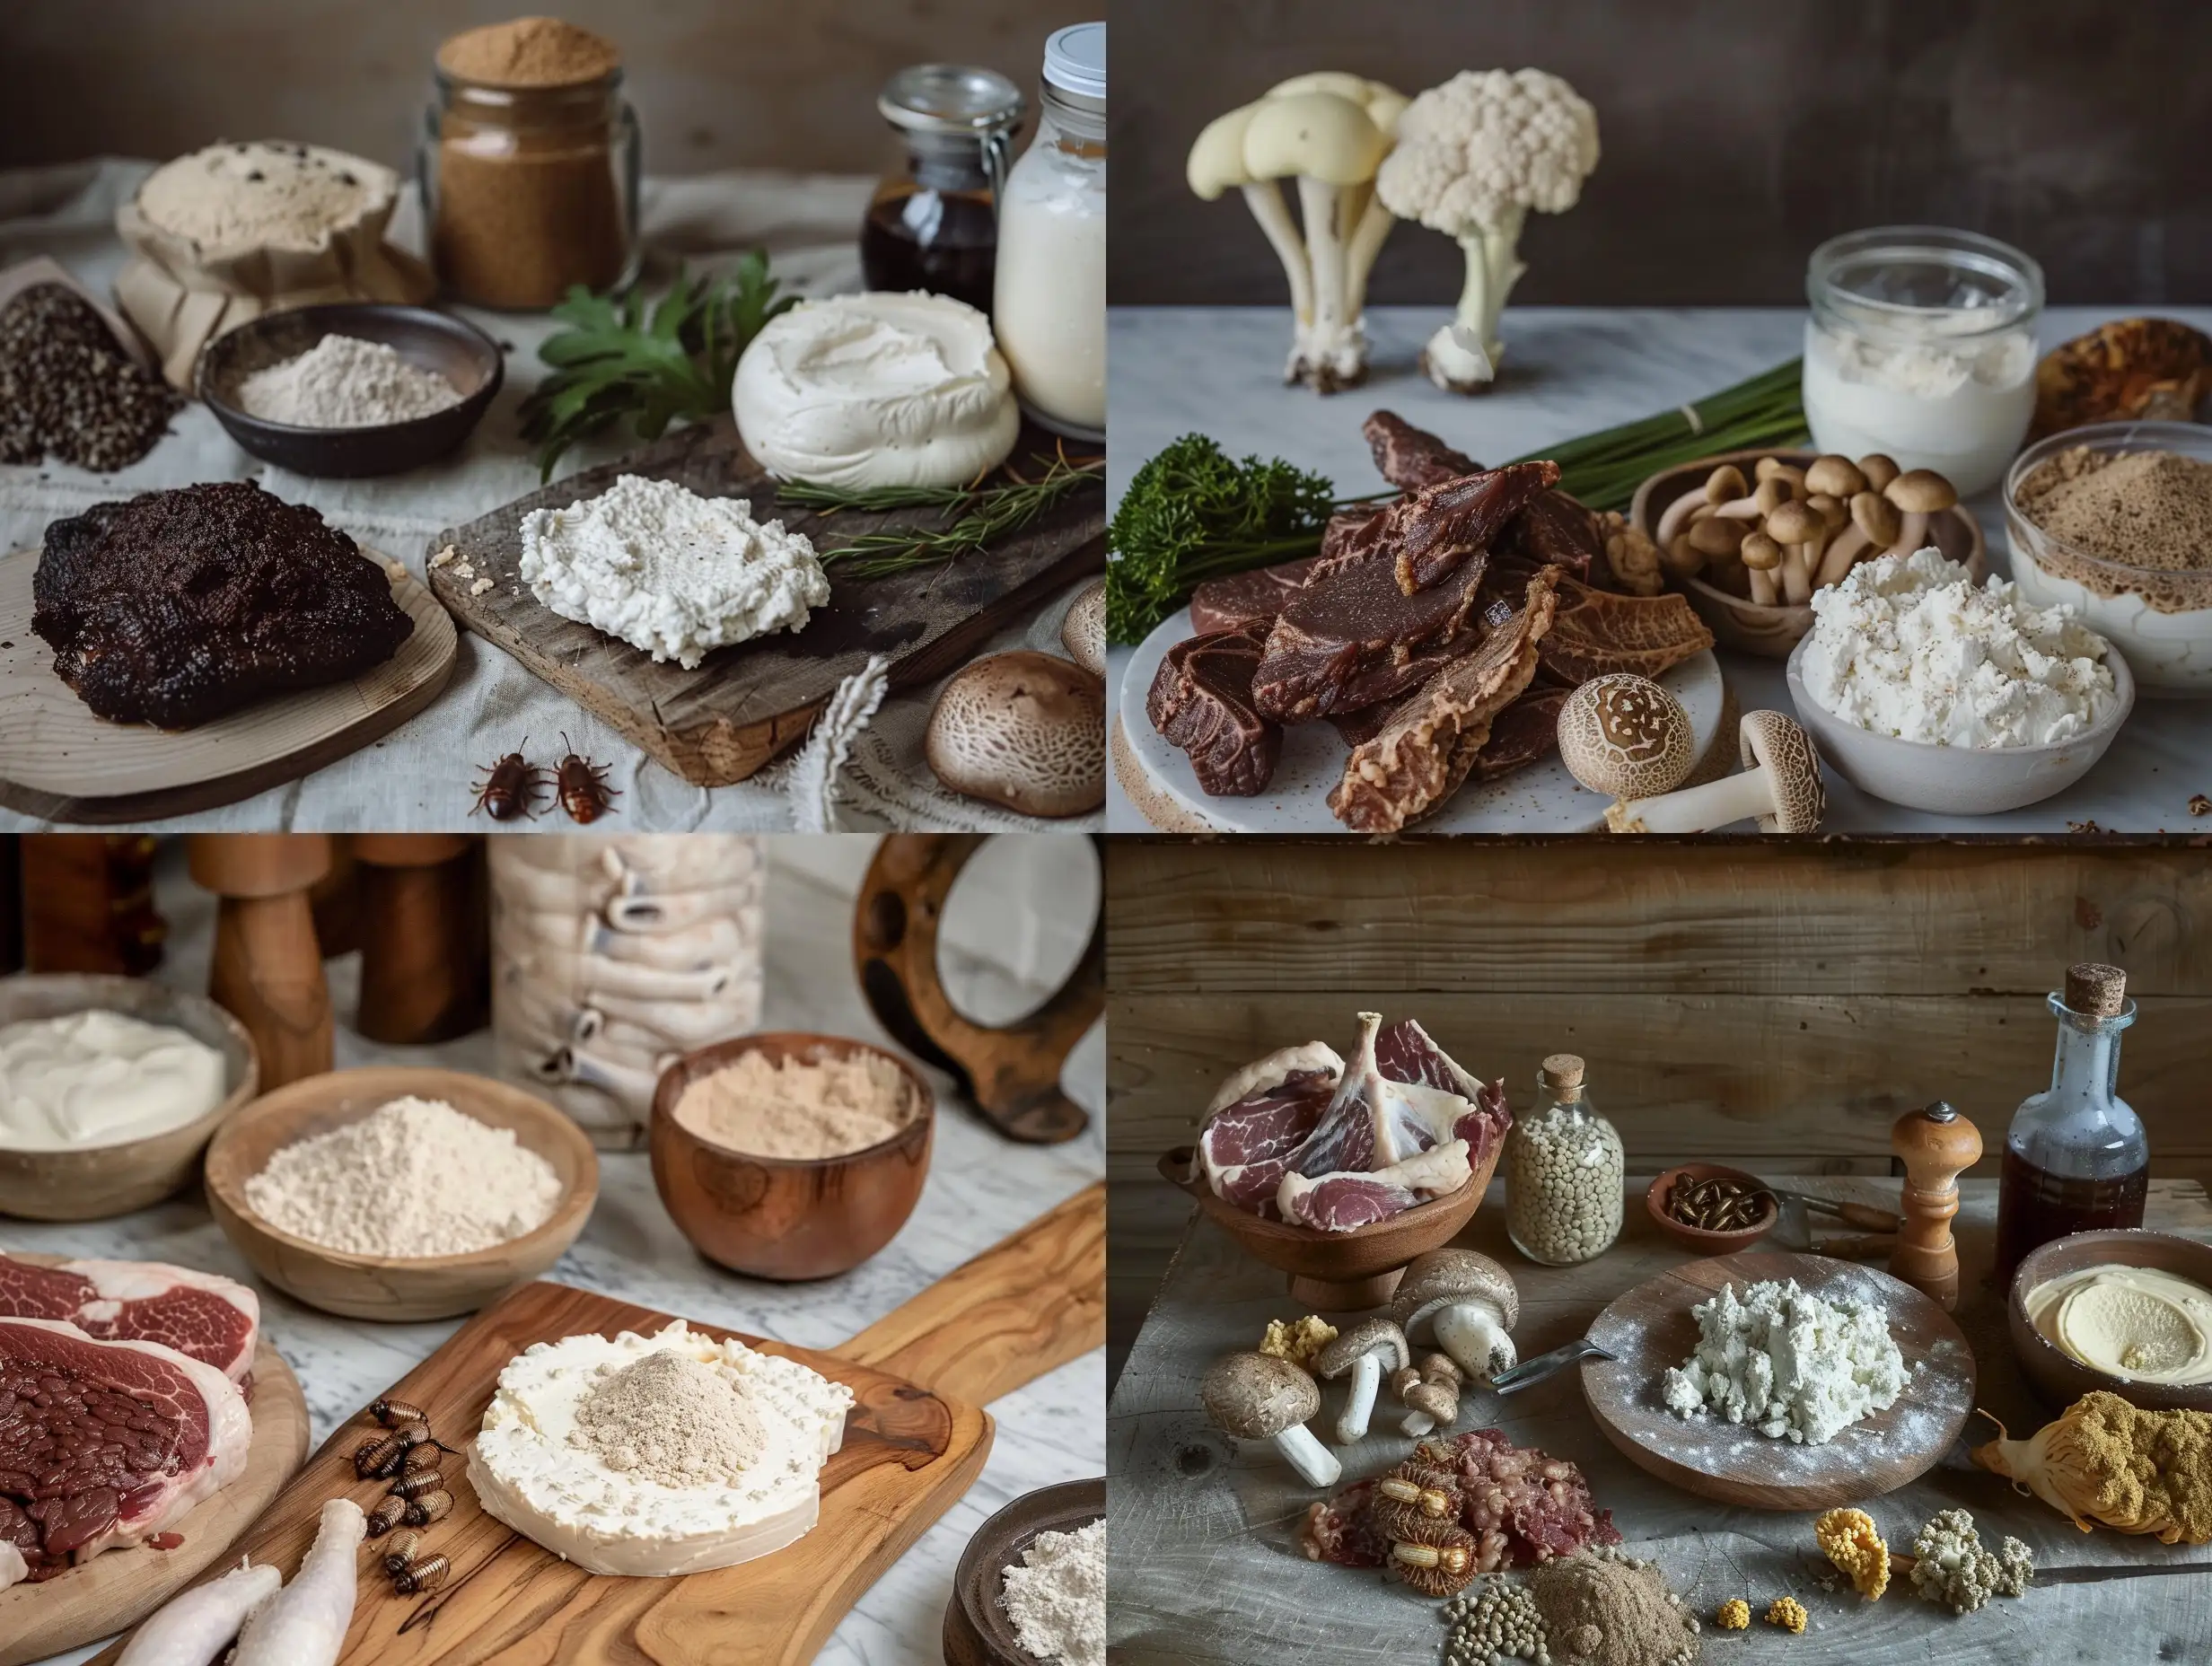 Sustainable-Food-Alternatives-Cultered-Meat-Insect-Flour-and-Fungibased-Cream-Cheese-on-a-Table